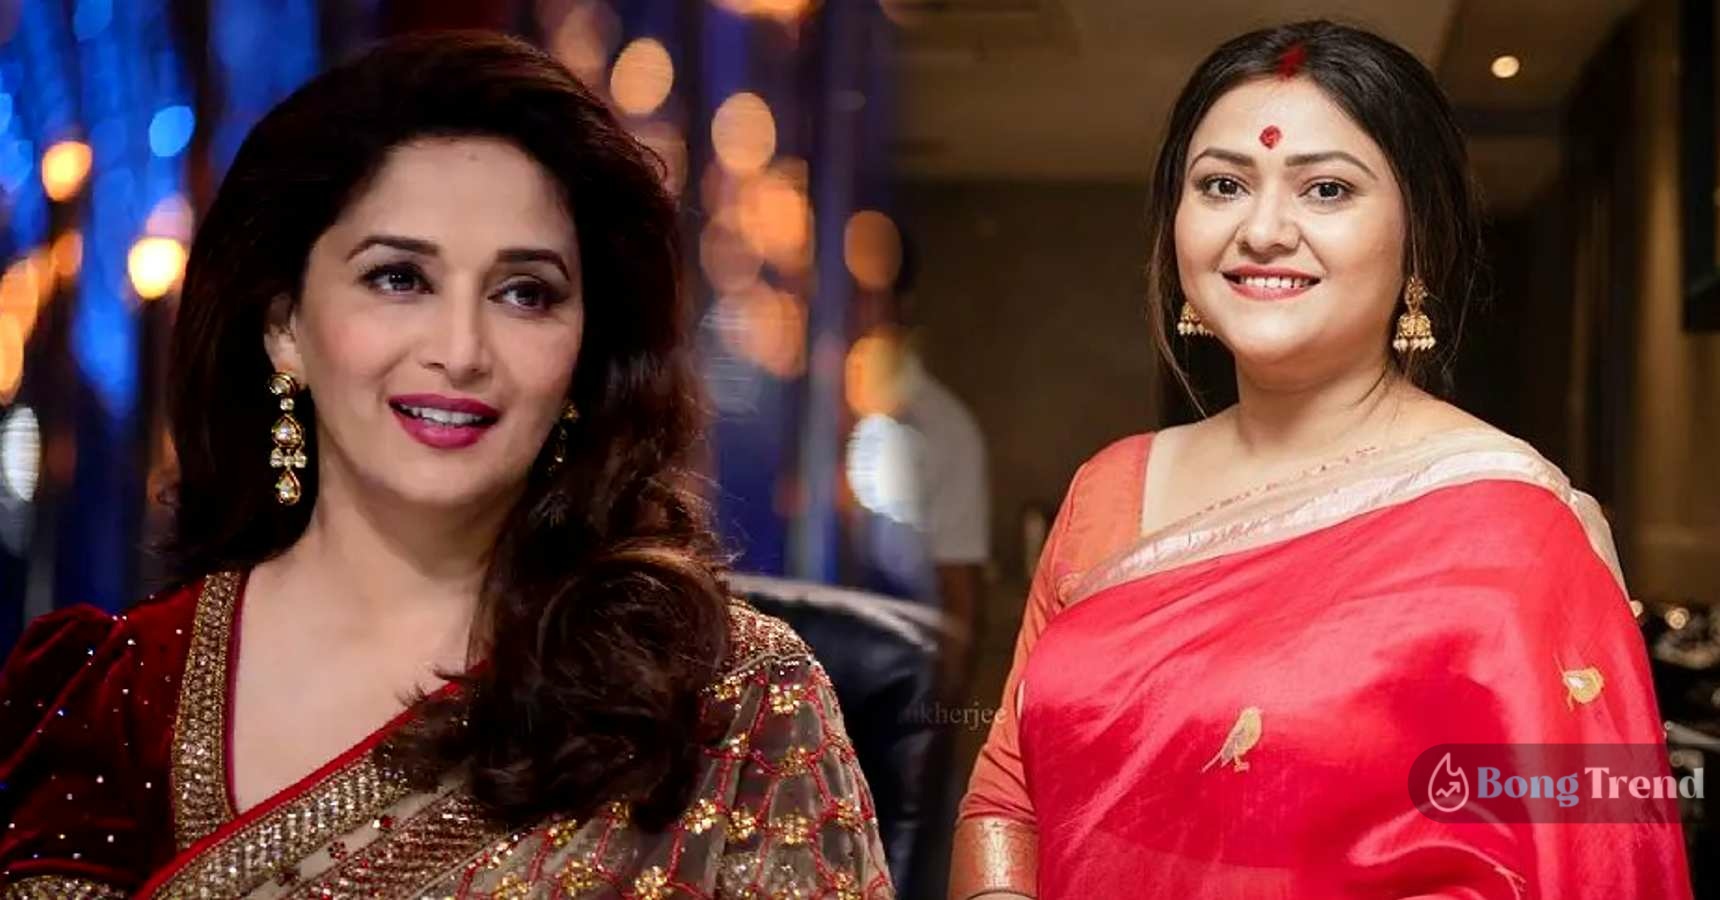 Koneenica Banerjee dreamed to became Madhuri Dixit while she was little